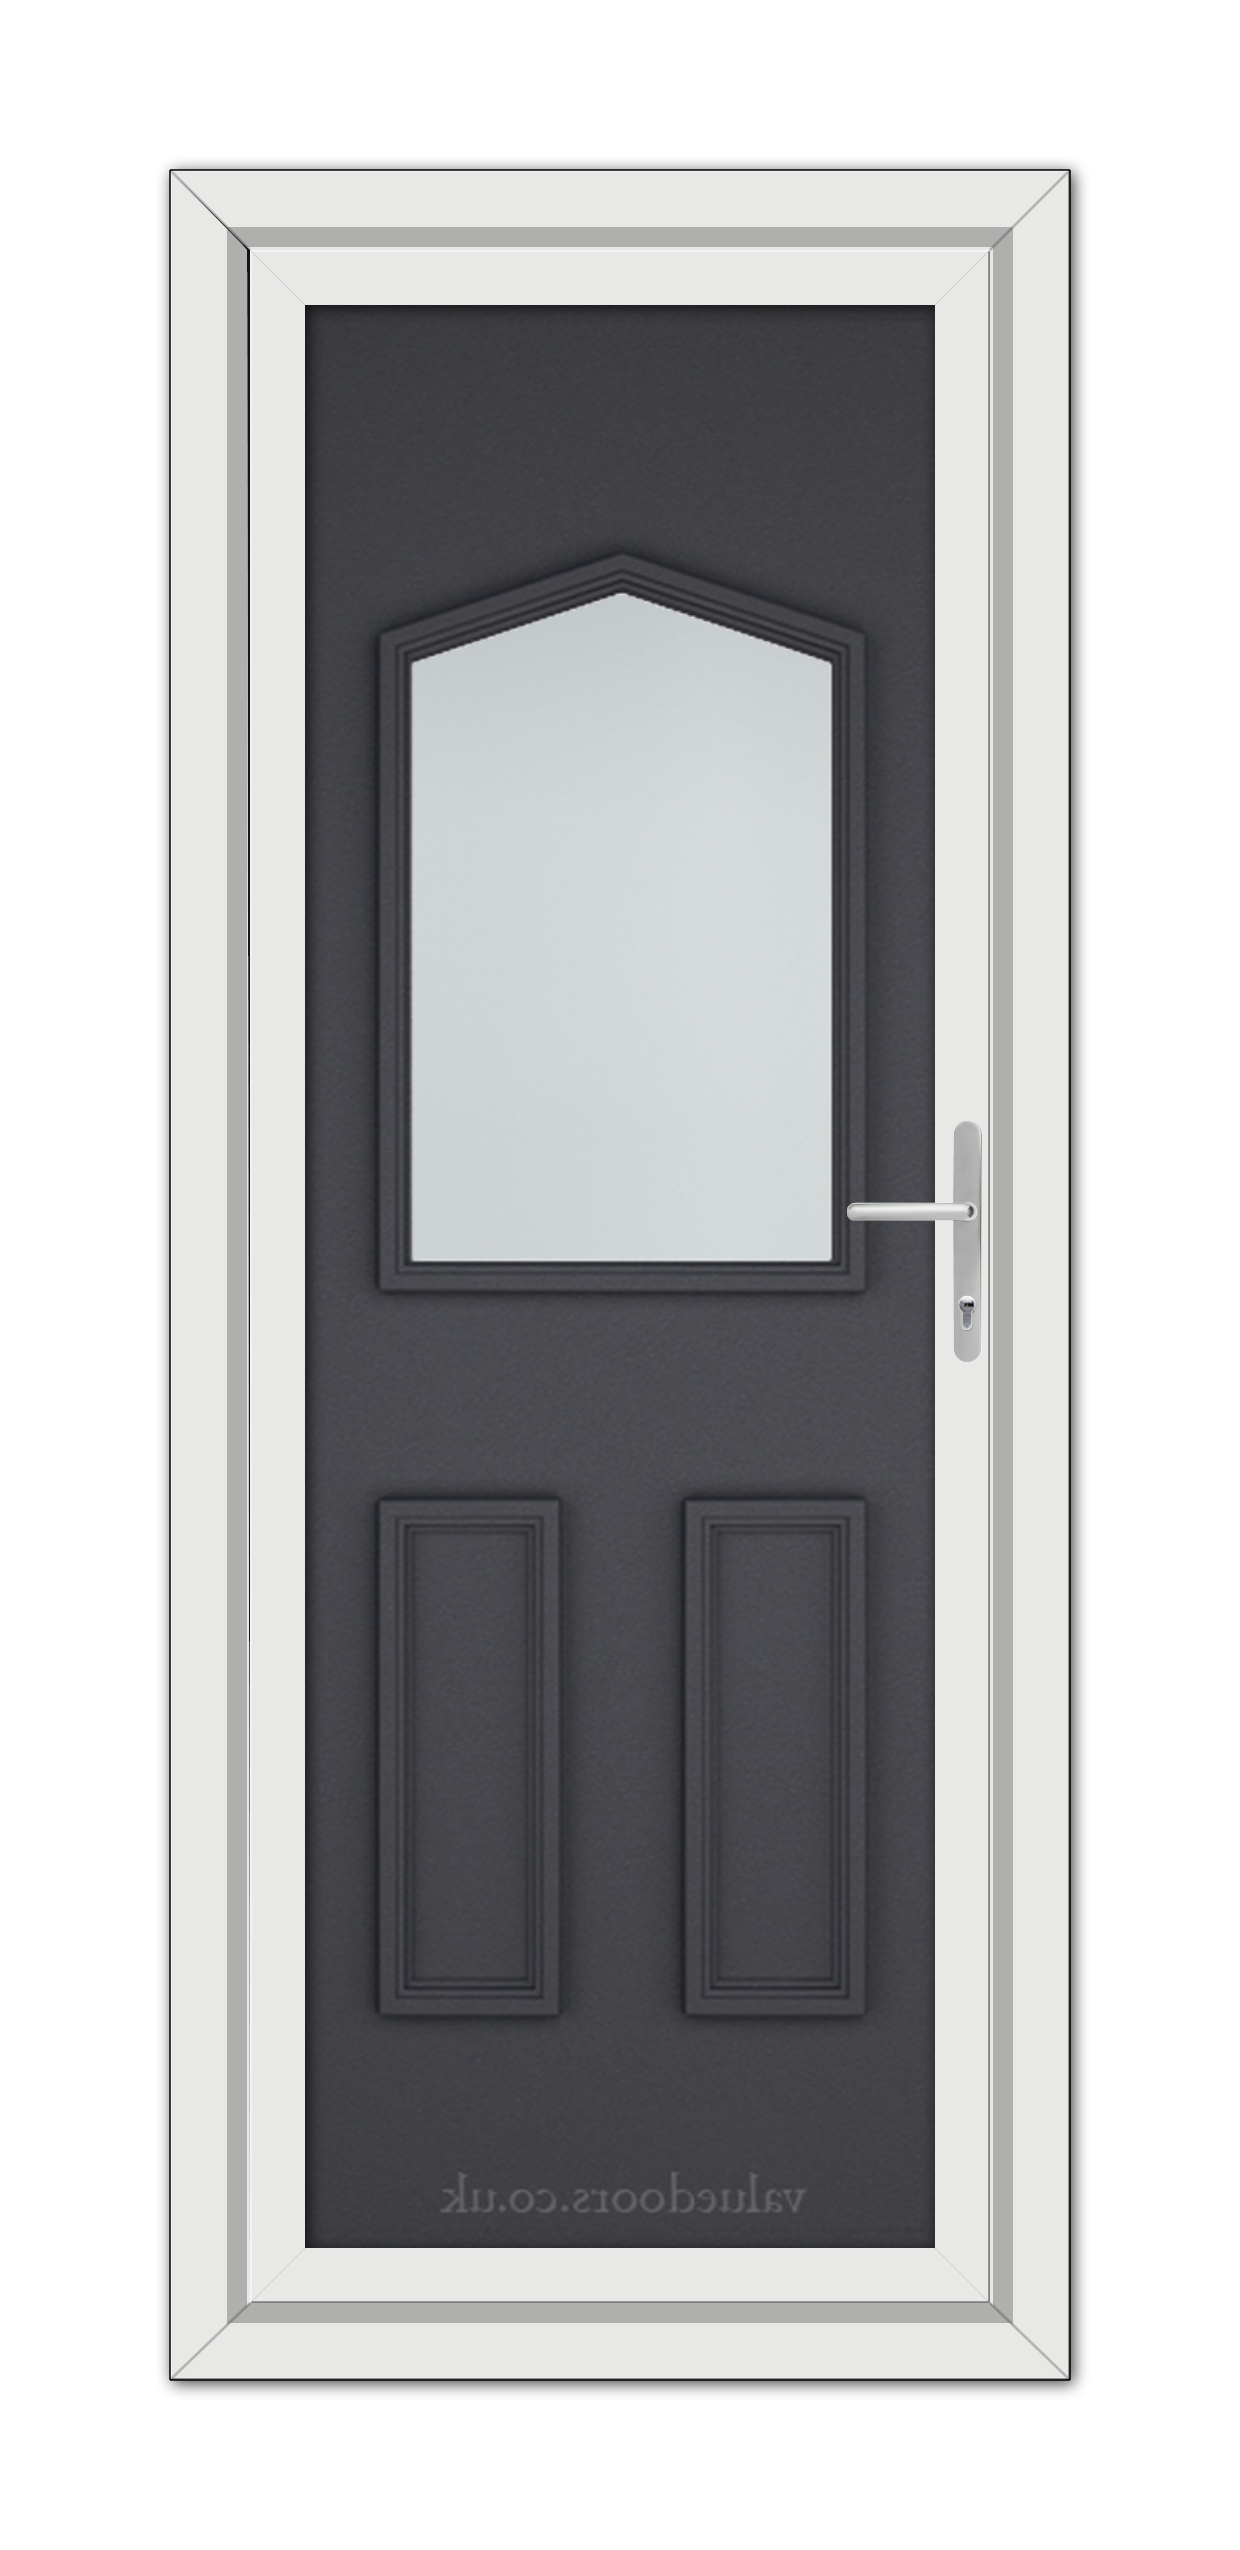 A modern Grey Grained Oxford uPVC Door featuring an arched window at the top, two recessed panels below, and a metallic handle on the right side, set in a white frame.